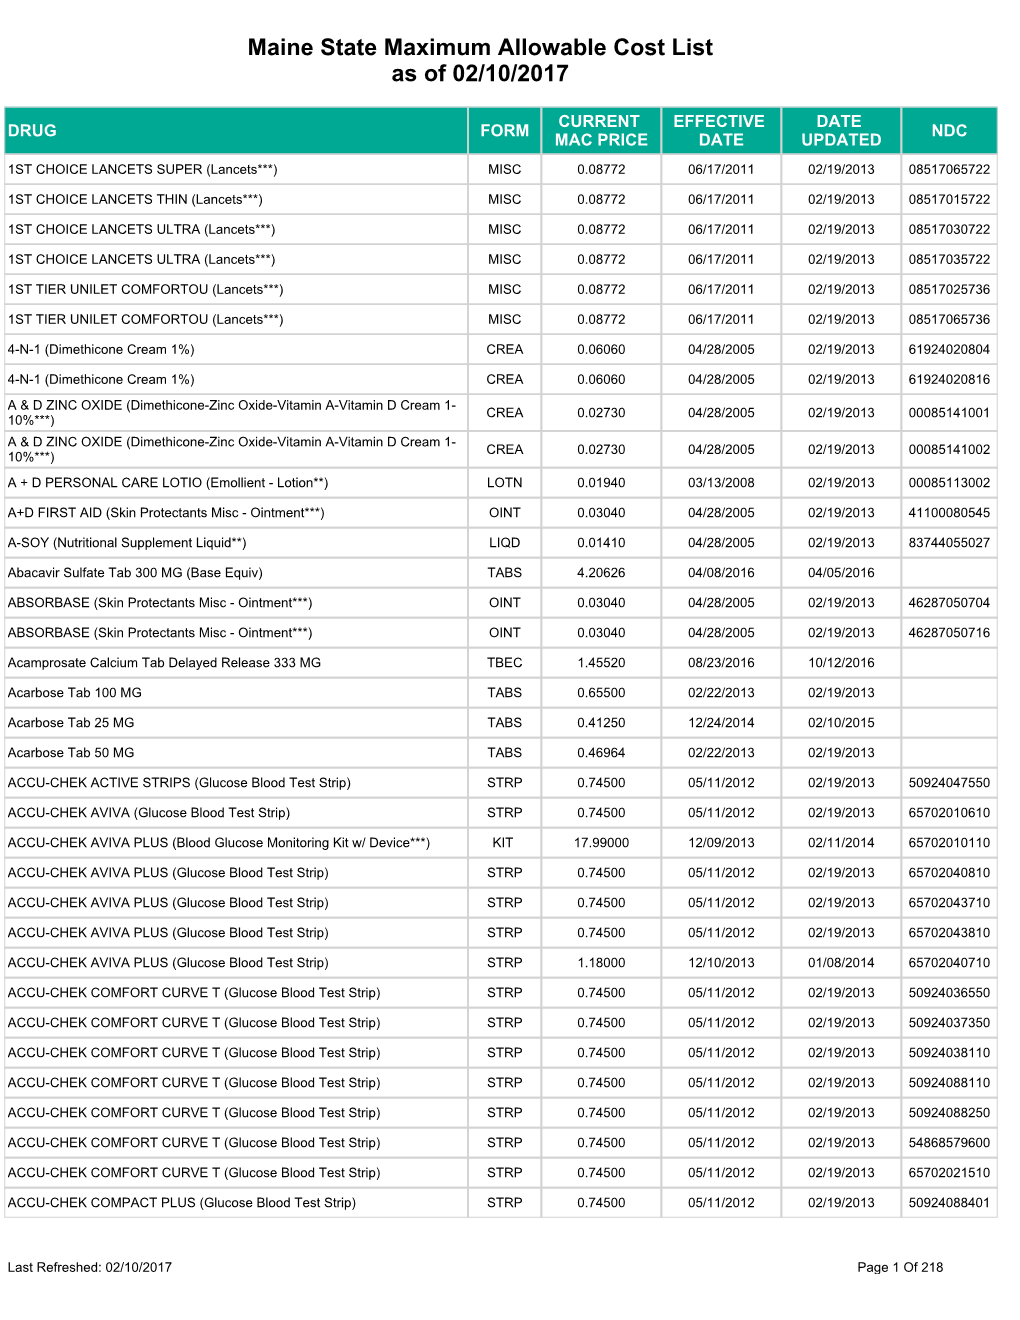 Maine State Maximum Allowable Cost List As of 02/10/2017